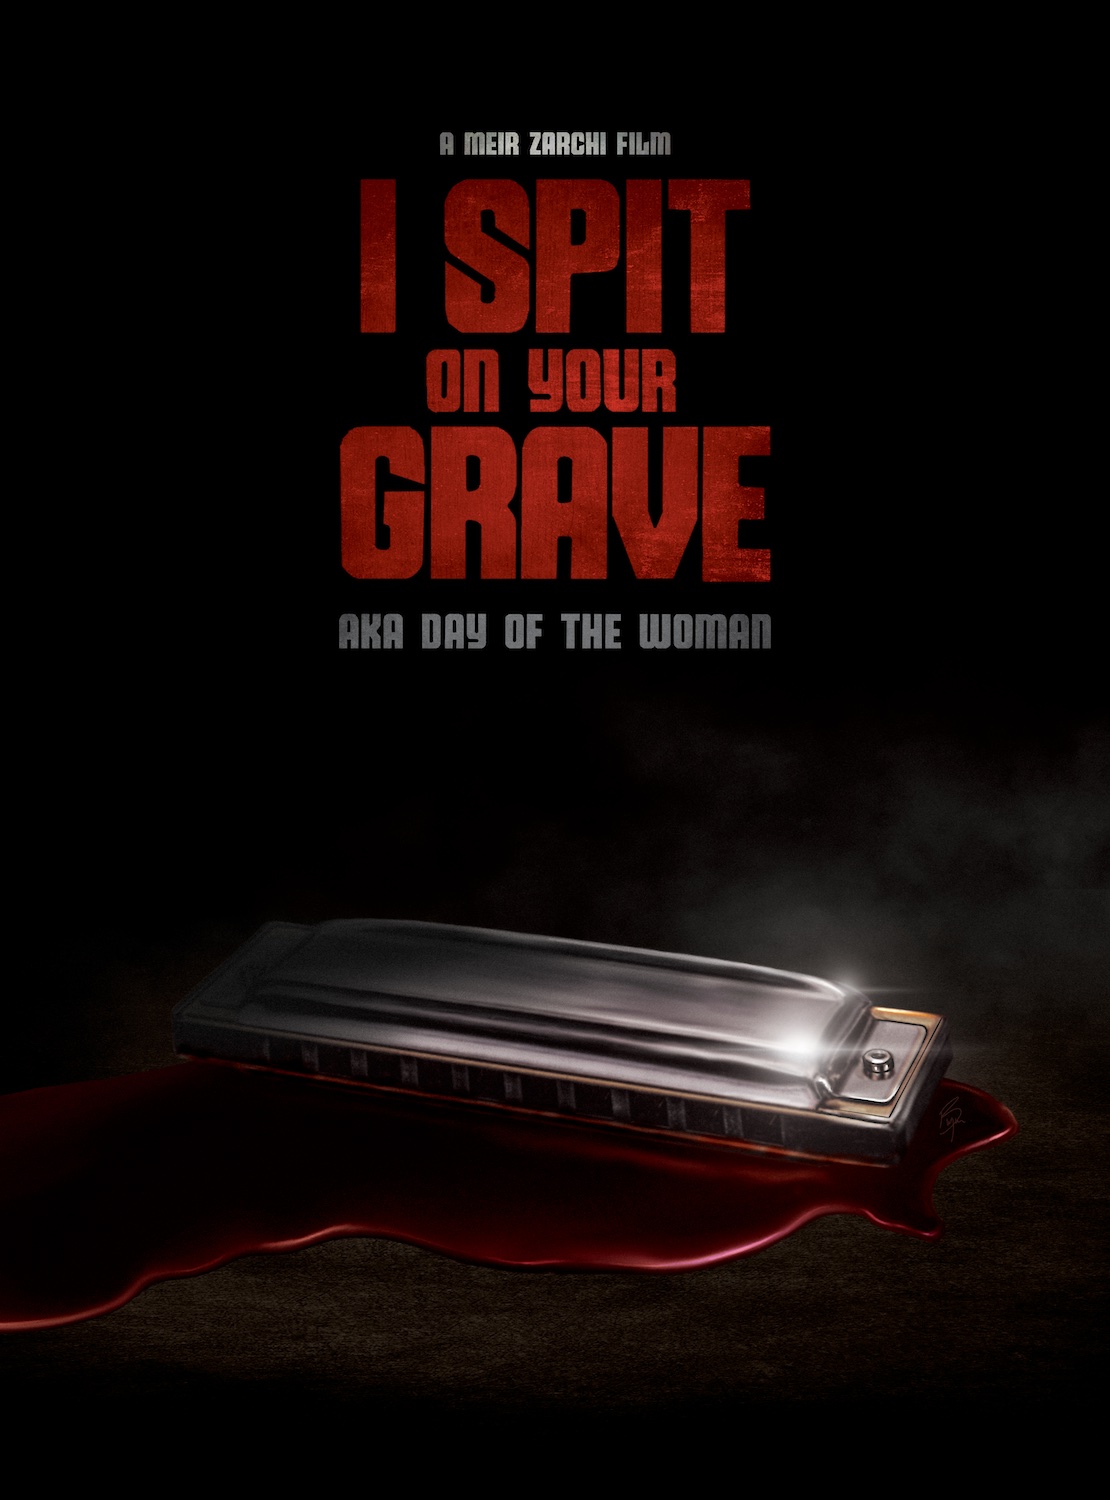 The Music Stops – “I Spit on Your Grave”